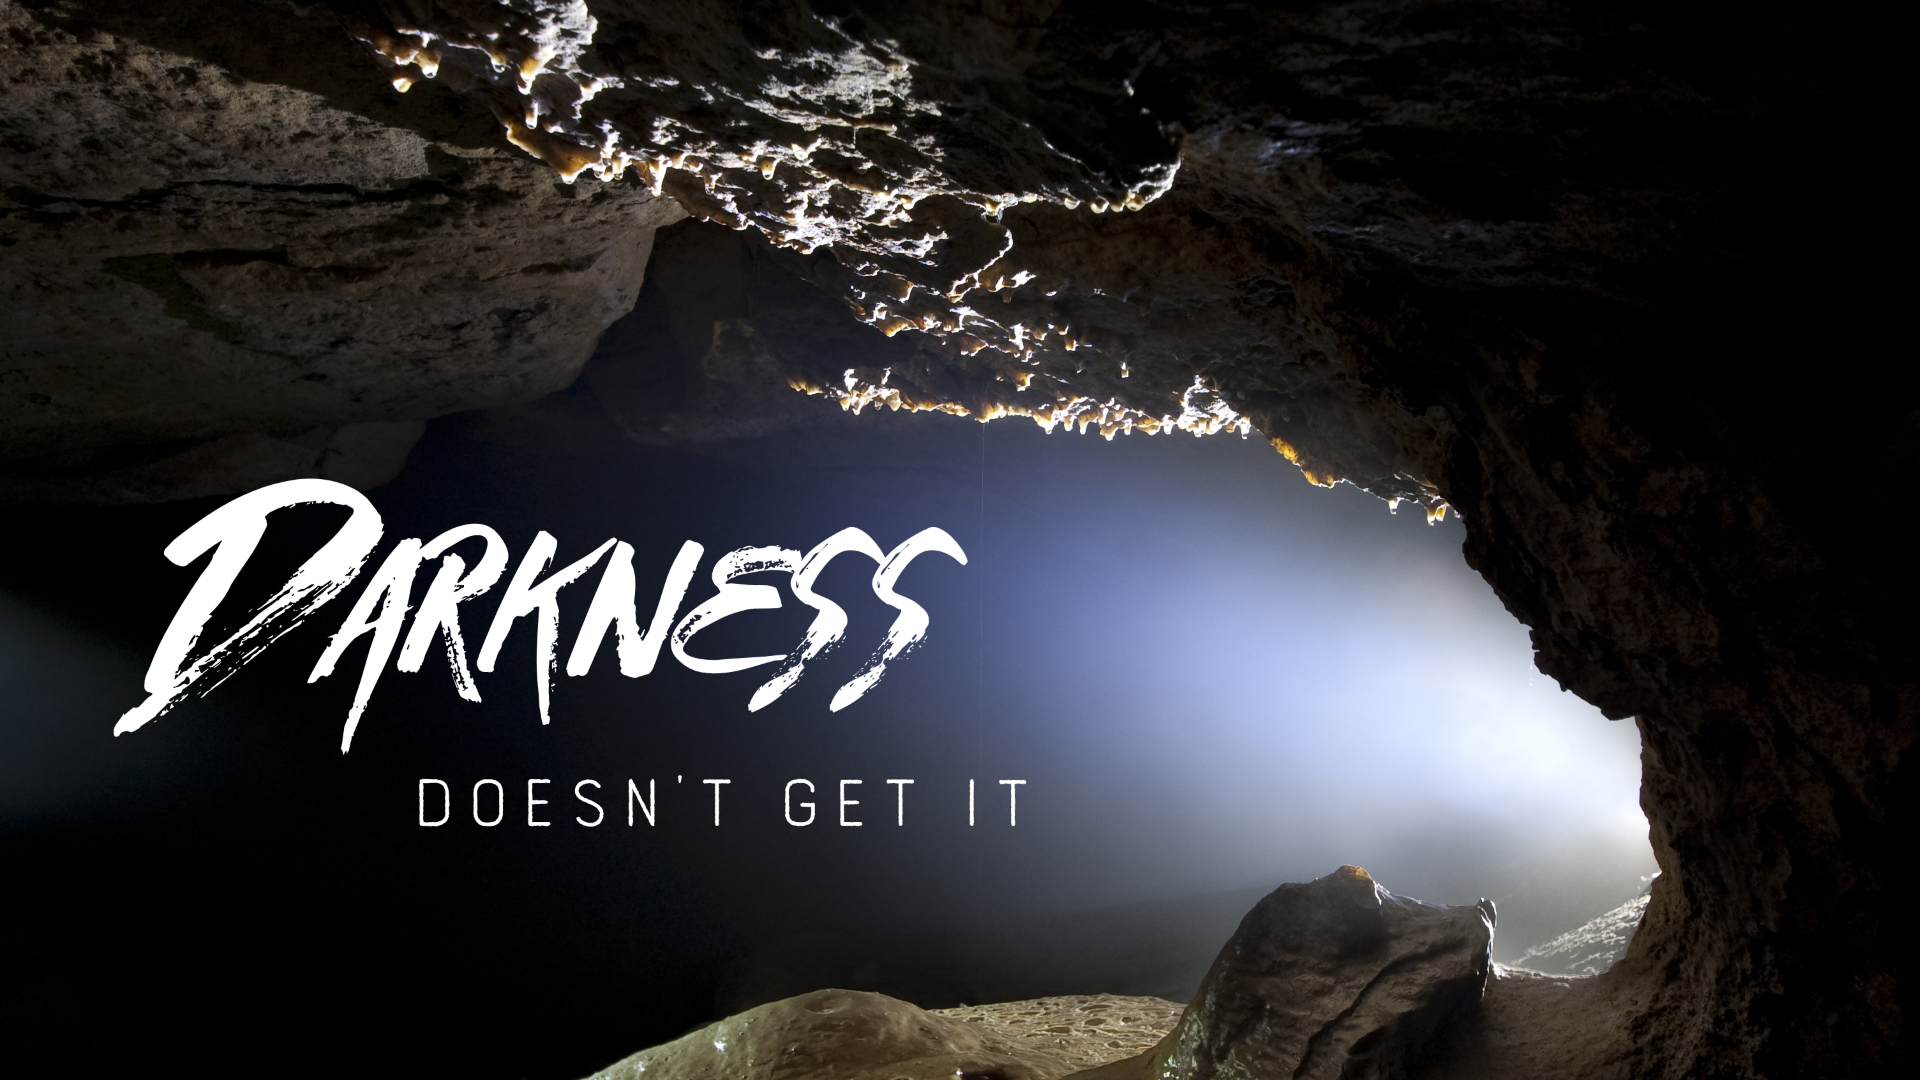 Sunday Morning - "Darkness Doesn't Get It"